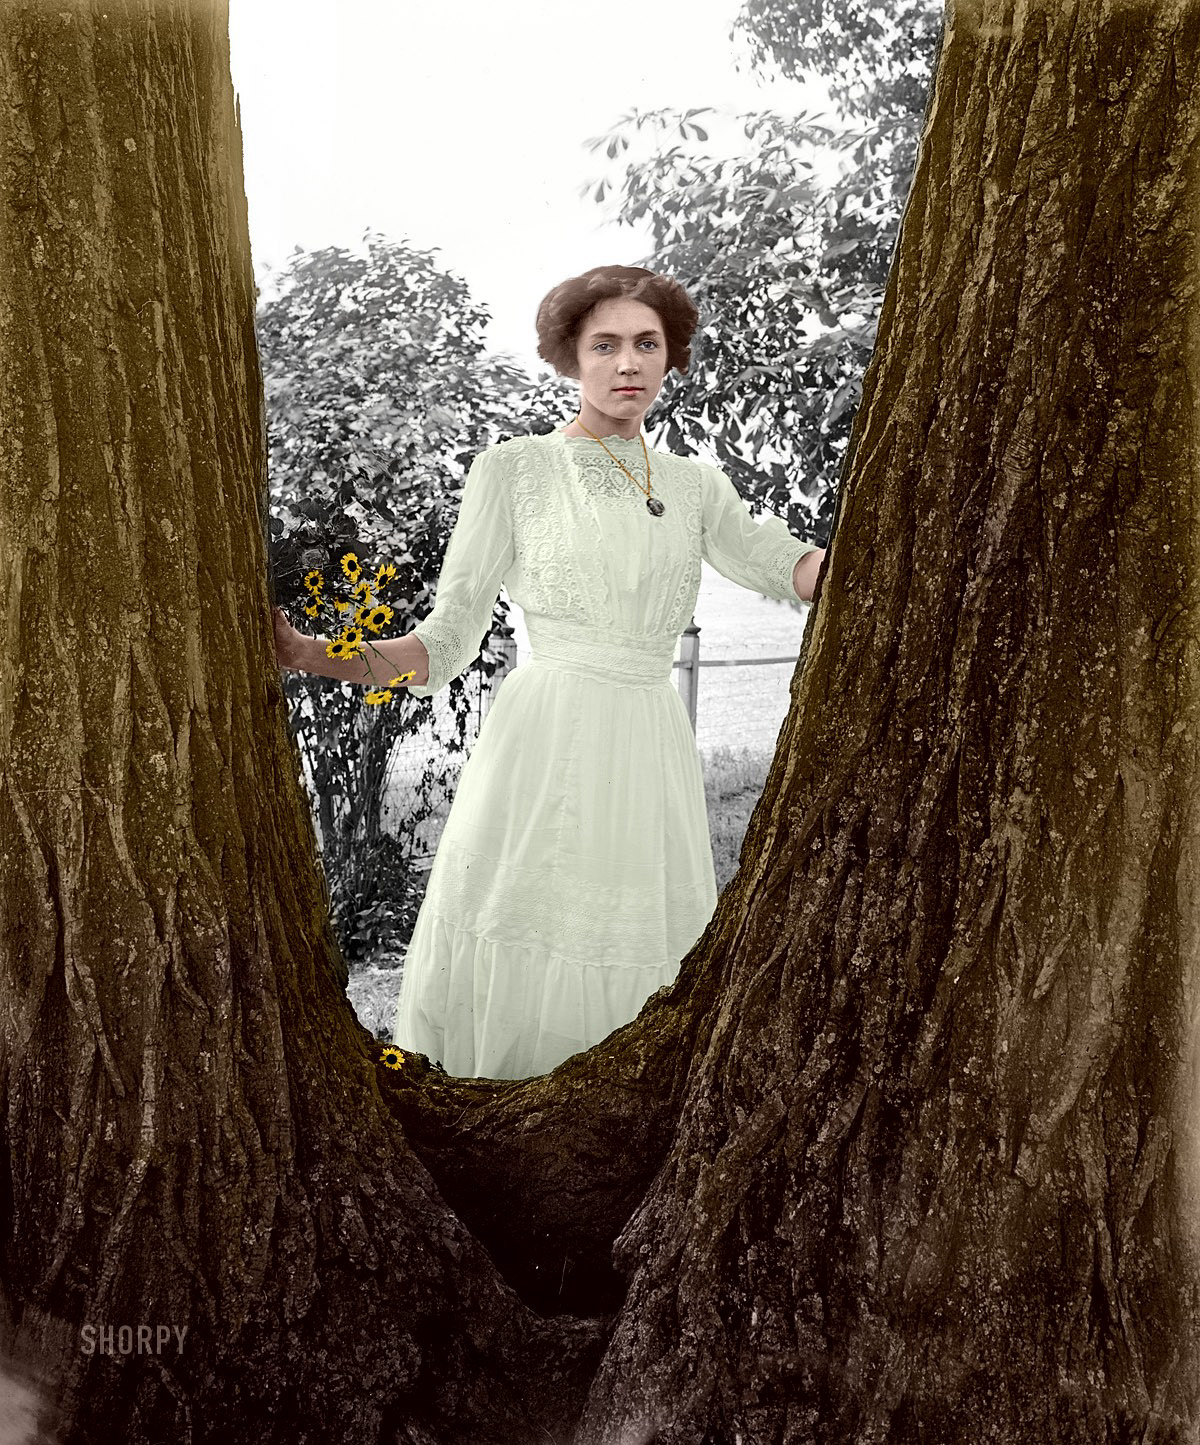 Colorized from Shorpy's files. Lewinsville, Virginia, circa 1910. "Della Storm." A younger member of the Storm clan. National Photo Company Collection glass negative. View full size.